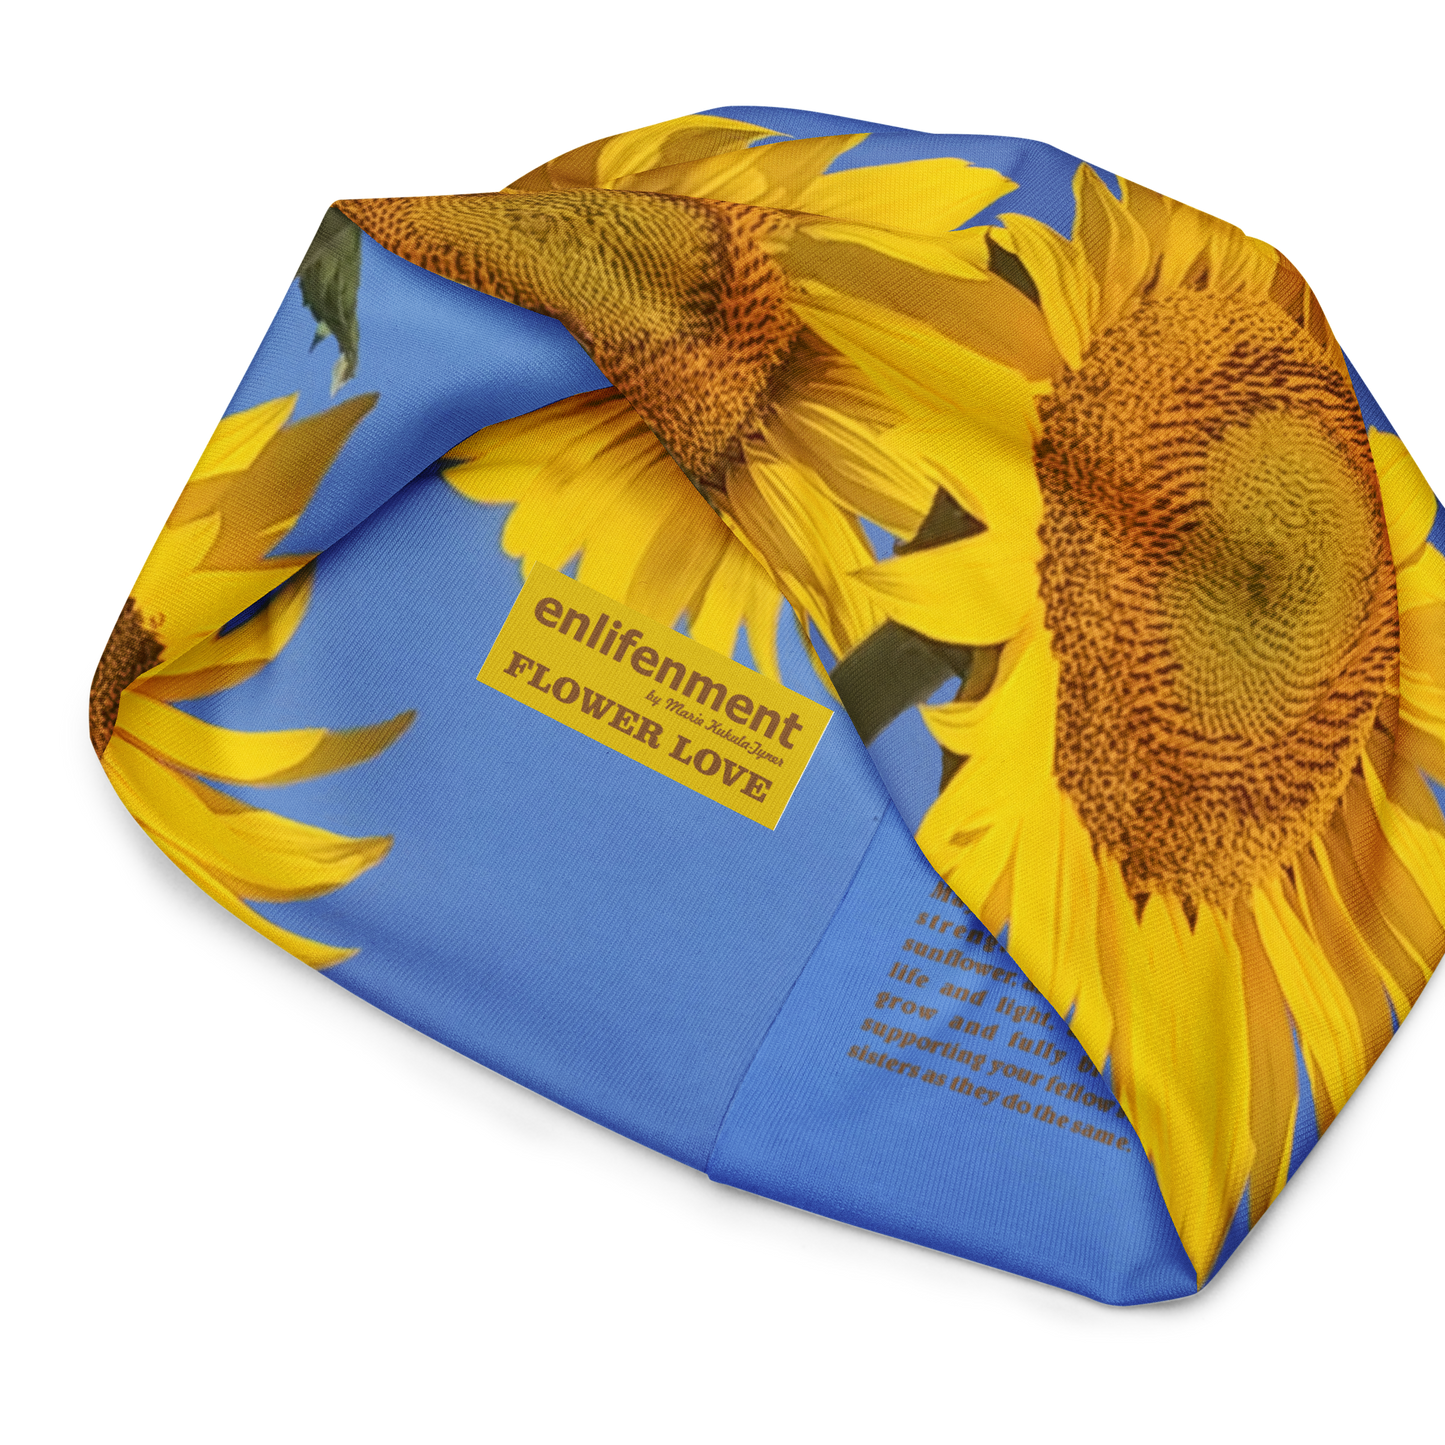 The FLOWER LOVE Collection - "Sunflower Sisters" Design Beanie - Lightweight, Cute Chemo Hat